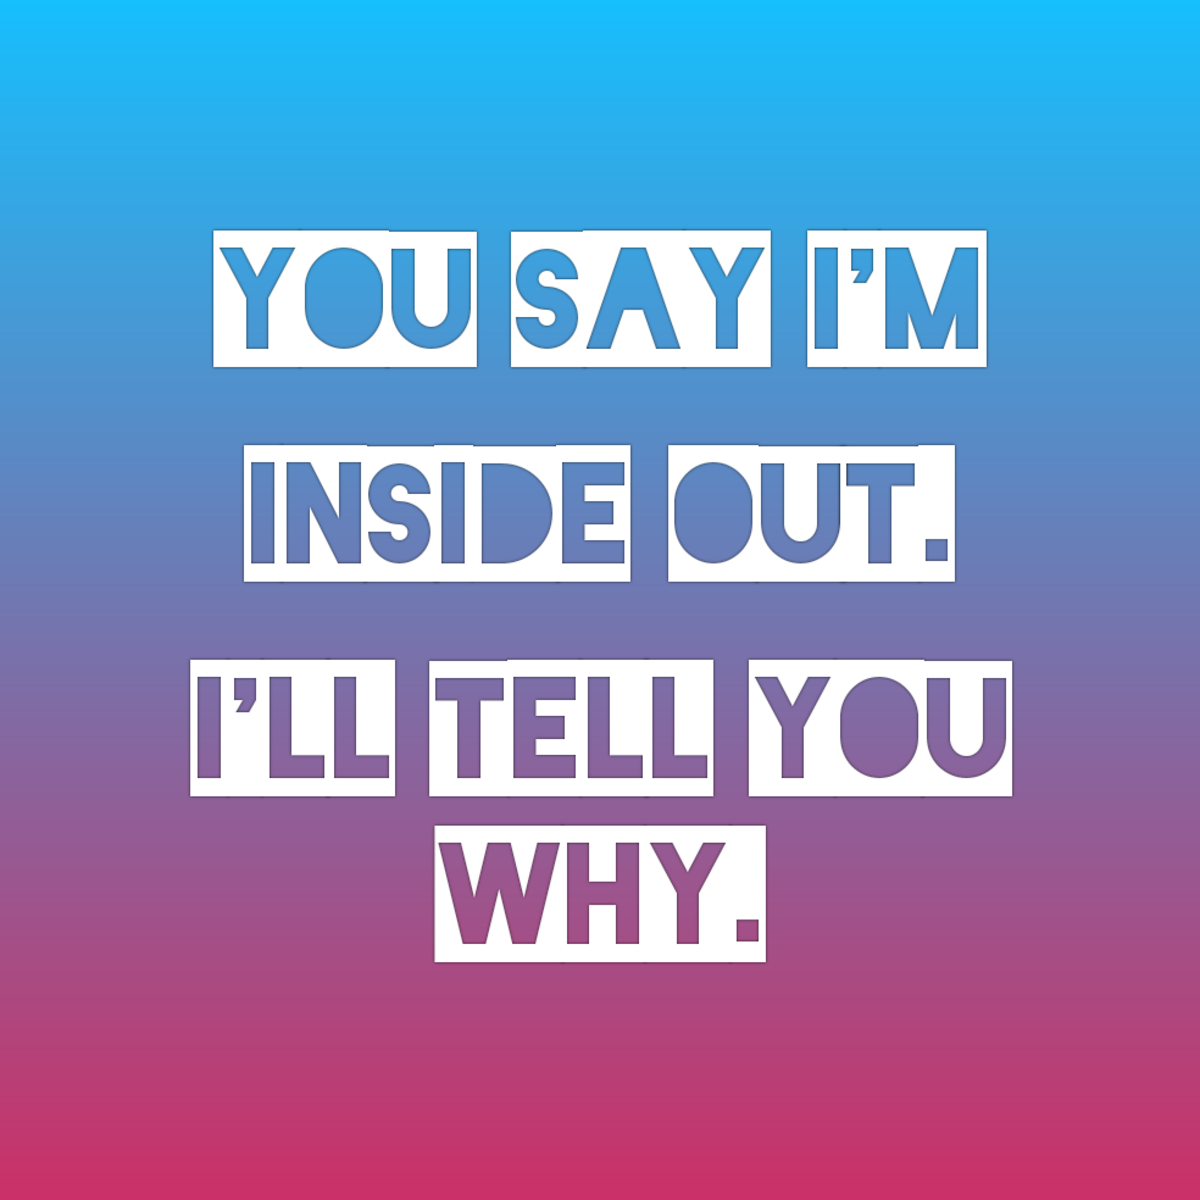 You Say I'm Inside Out, I'll Tell You Why.